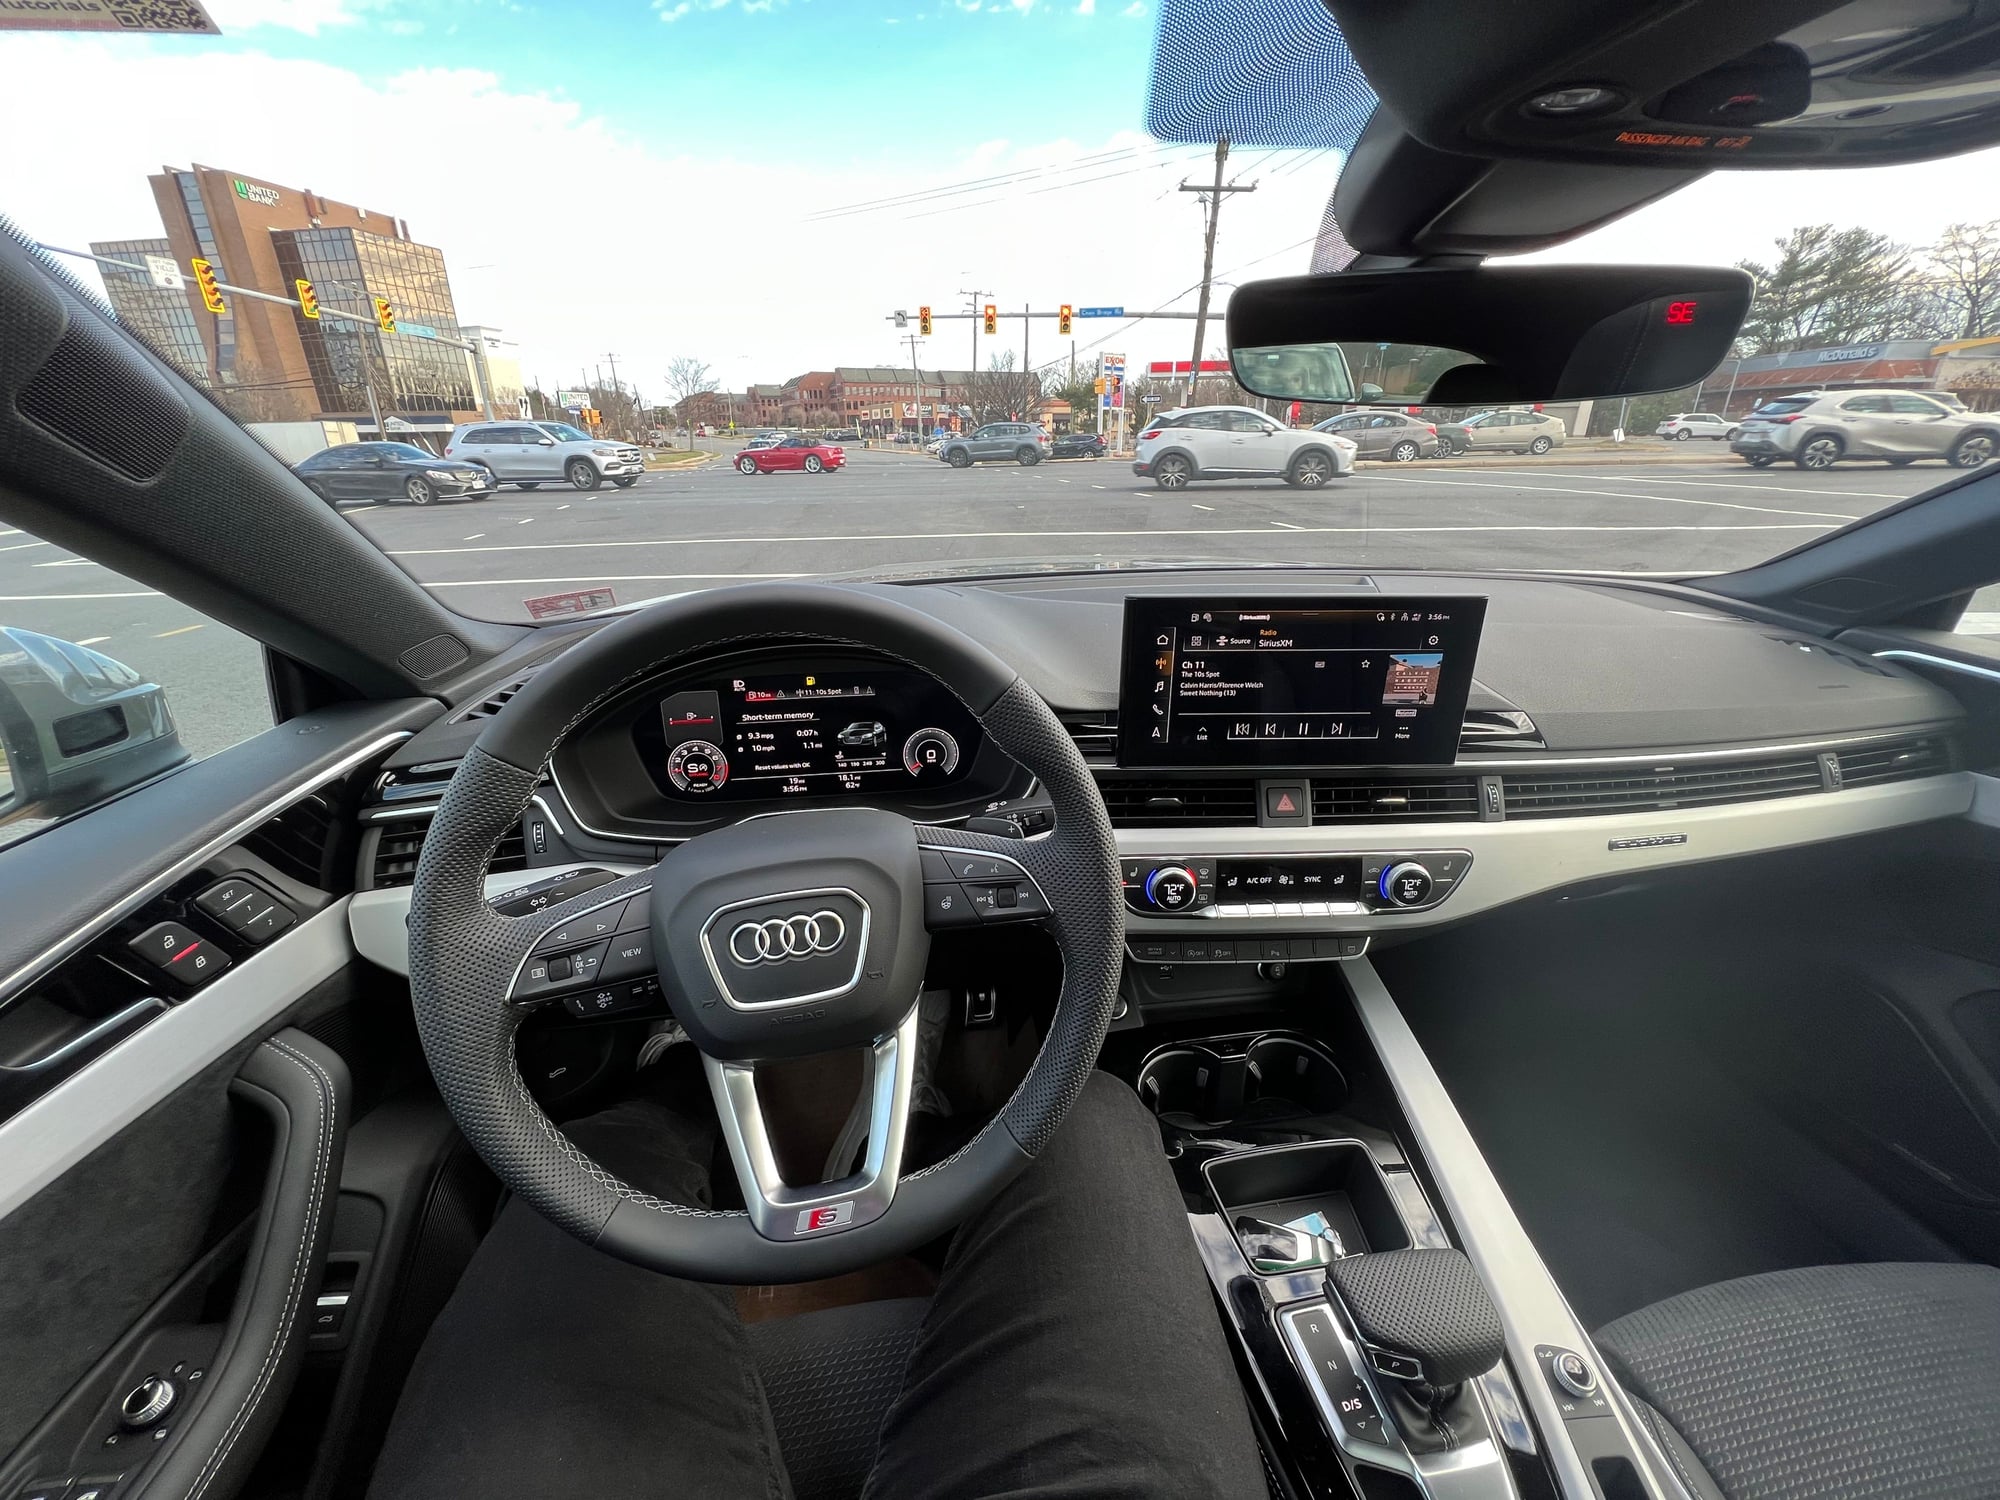 Interior/Upholstery - New 2023 (B9) A5/S5 Sportback brushed aluminum inlays interior trim - New - 2017 to 2024 Audi A5 - Vienna, VA 22181, United States